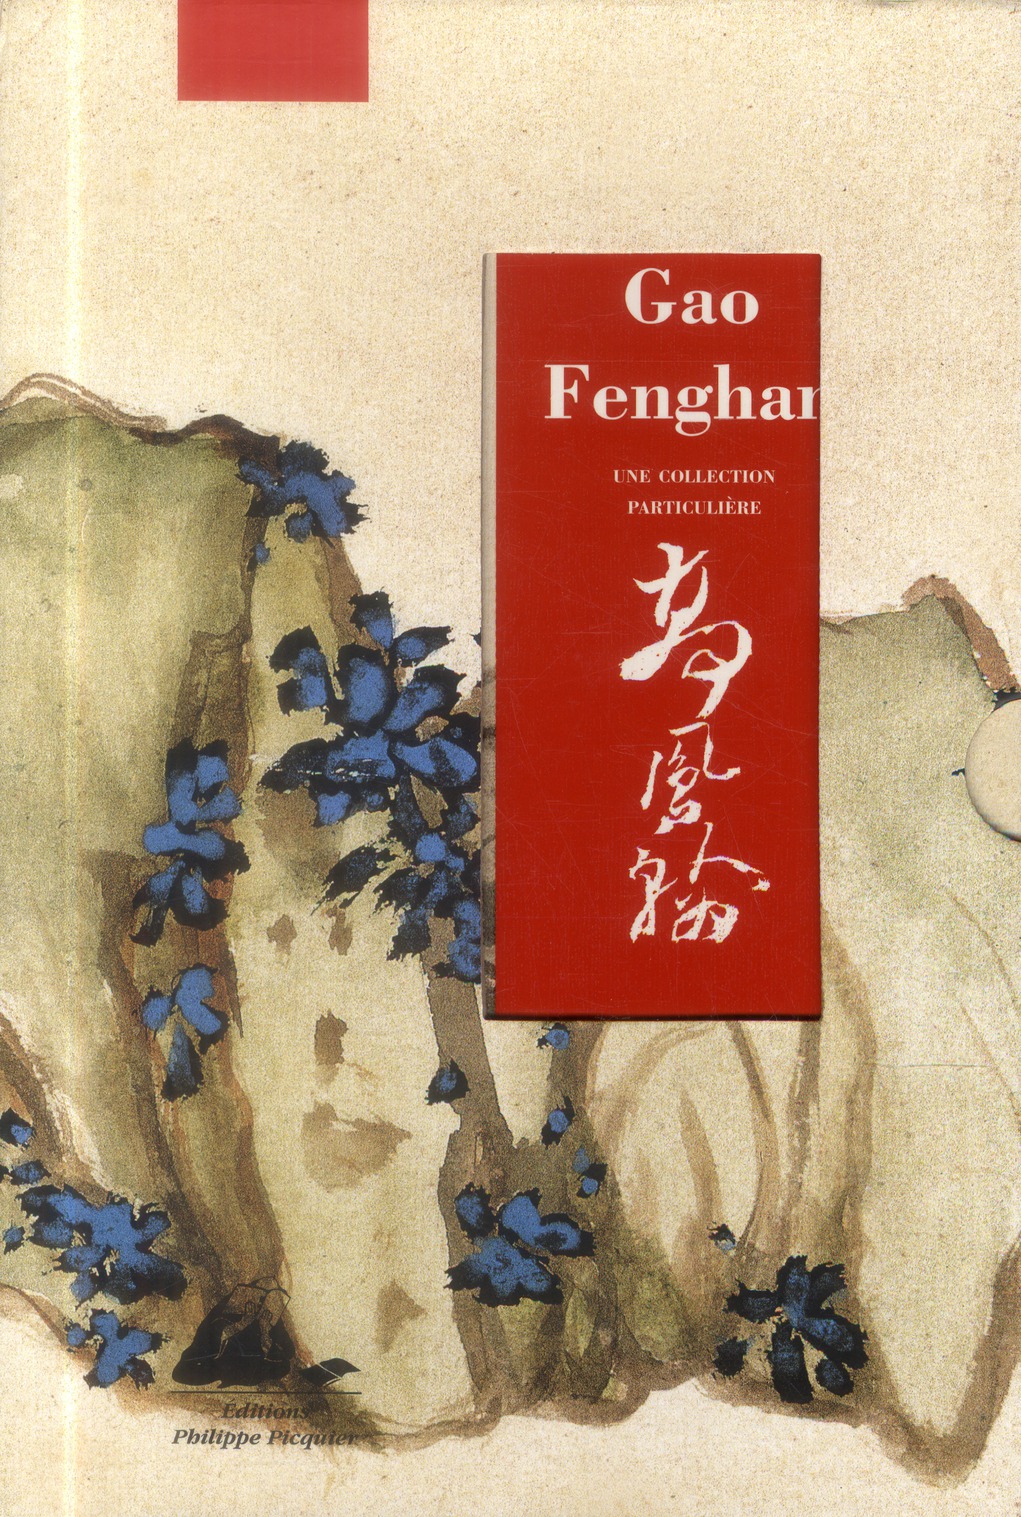 GAO FENGHAN - ZHANG ZONGCANG - COLLECTION PARTICULIERE